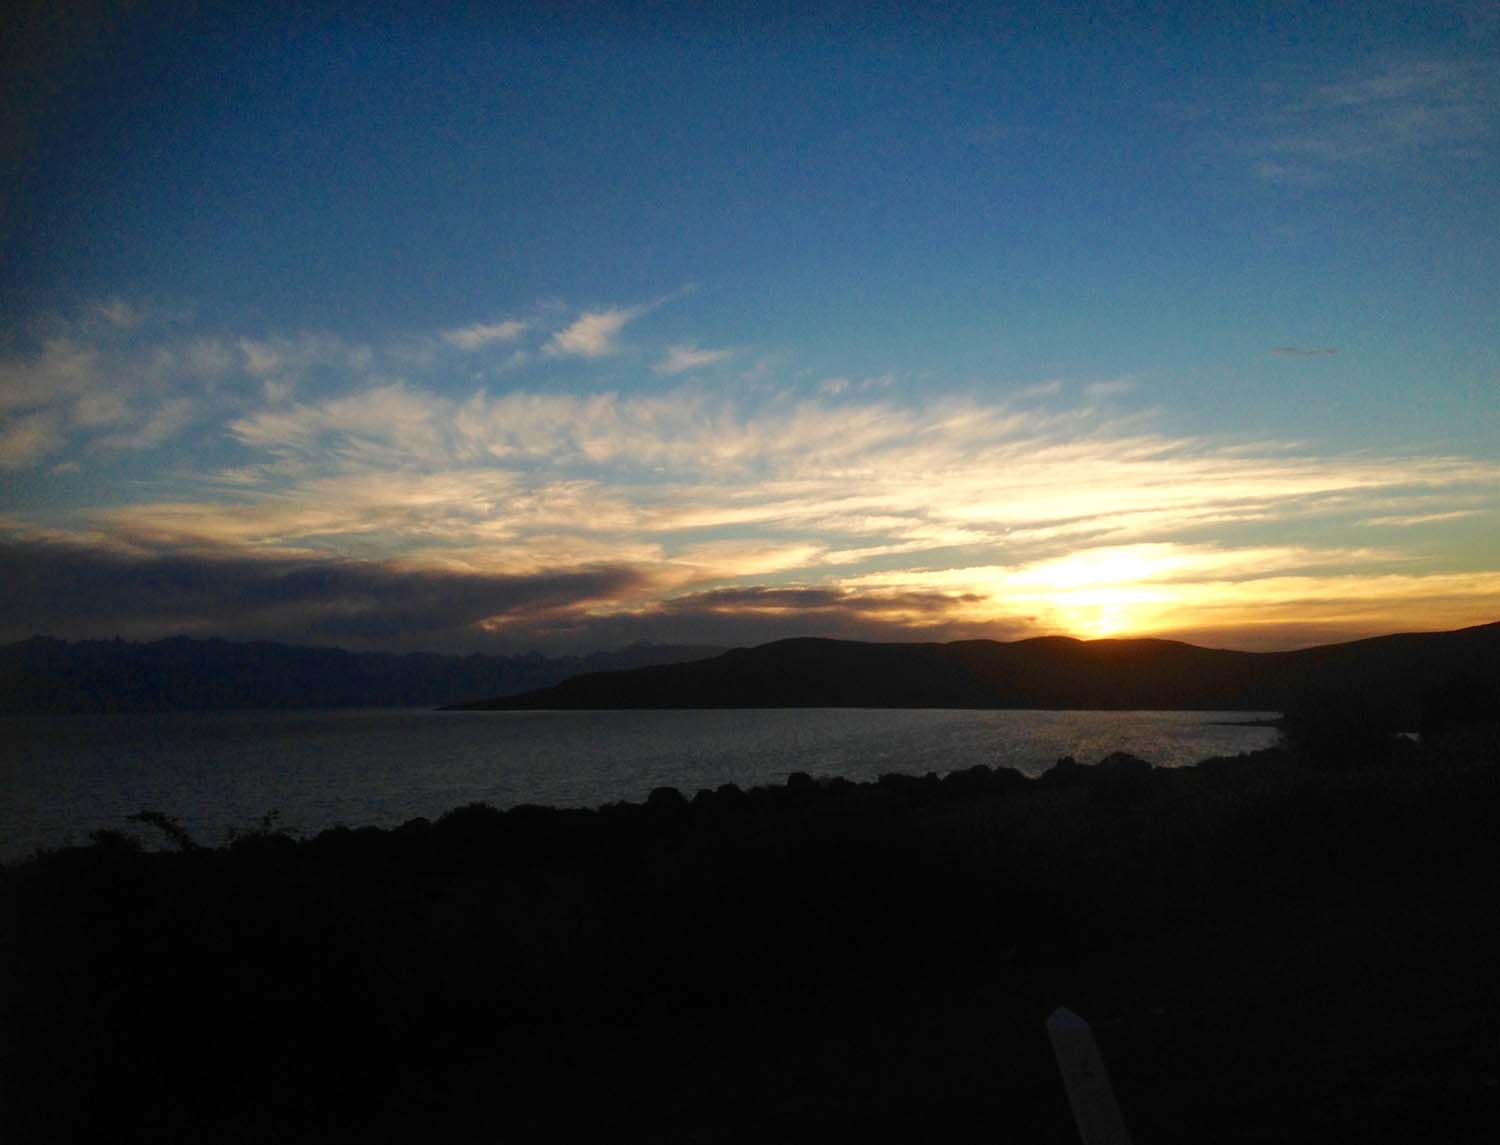 &nbsp;Evening arrival in Bariloche to a beautiful sunset